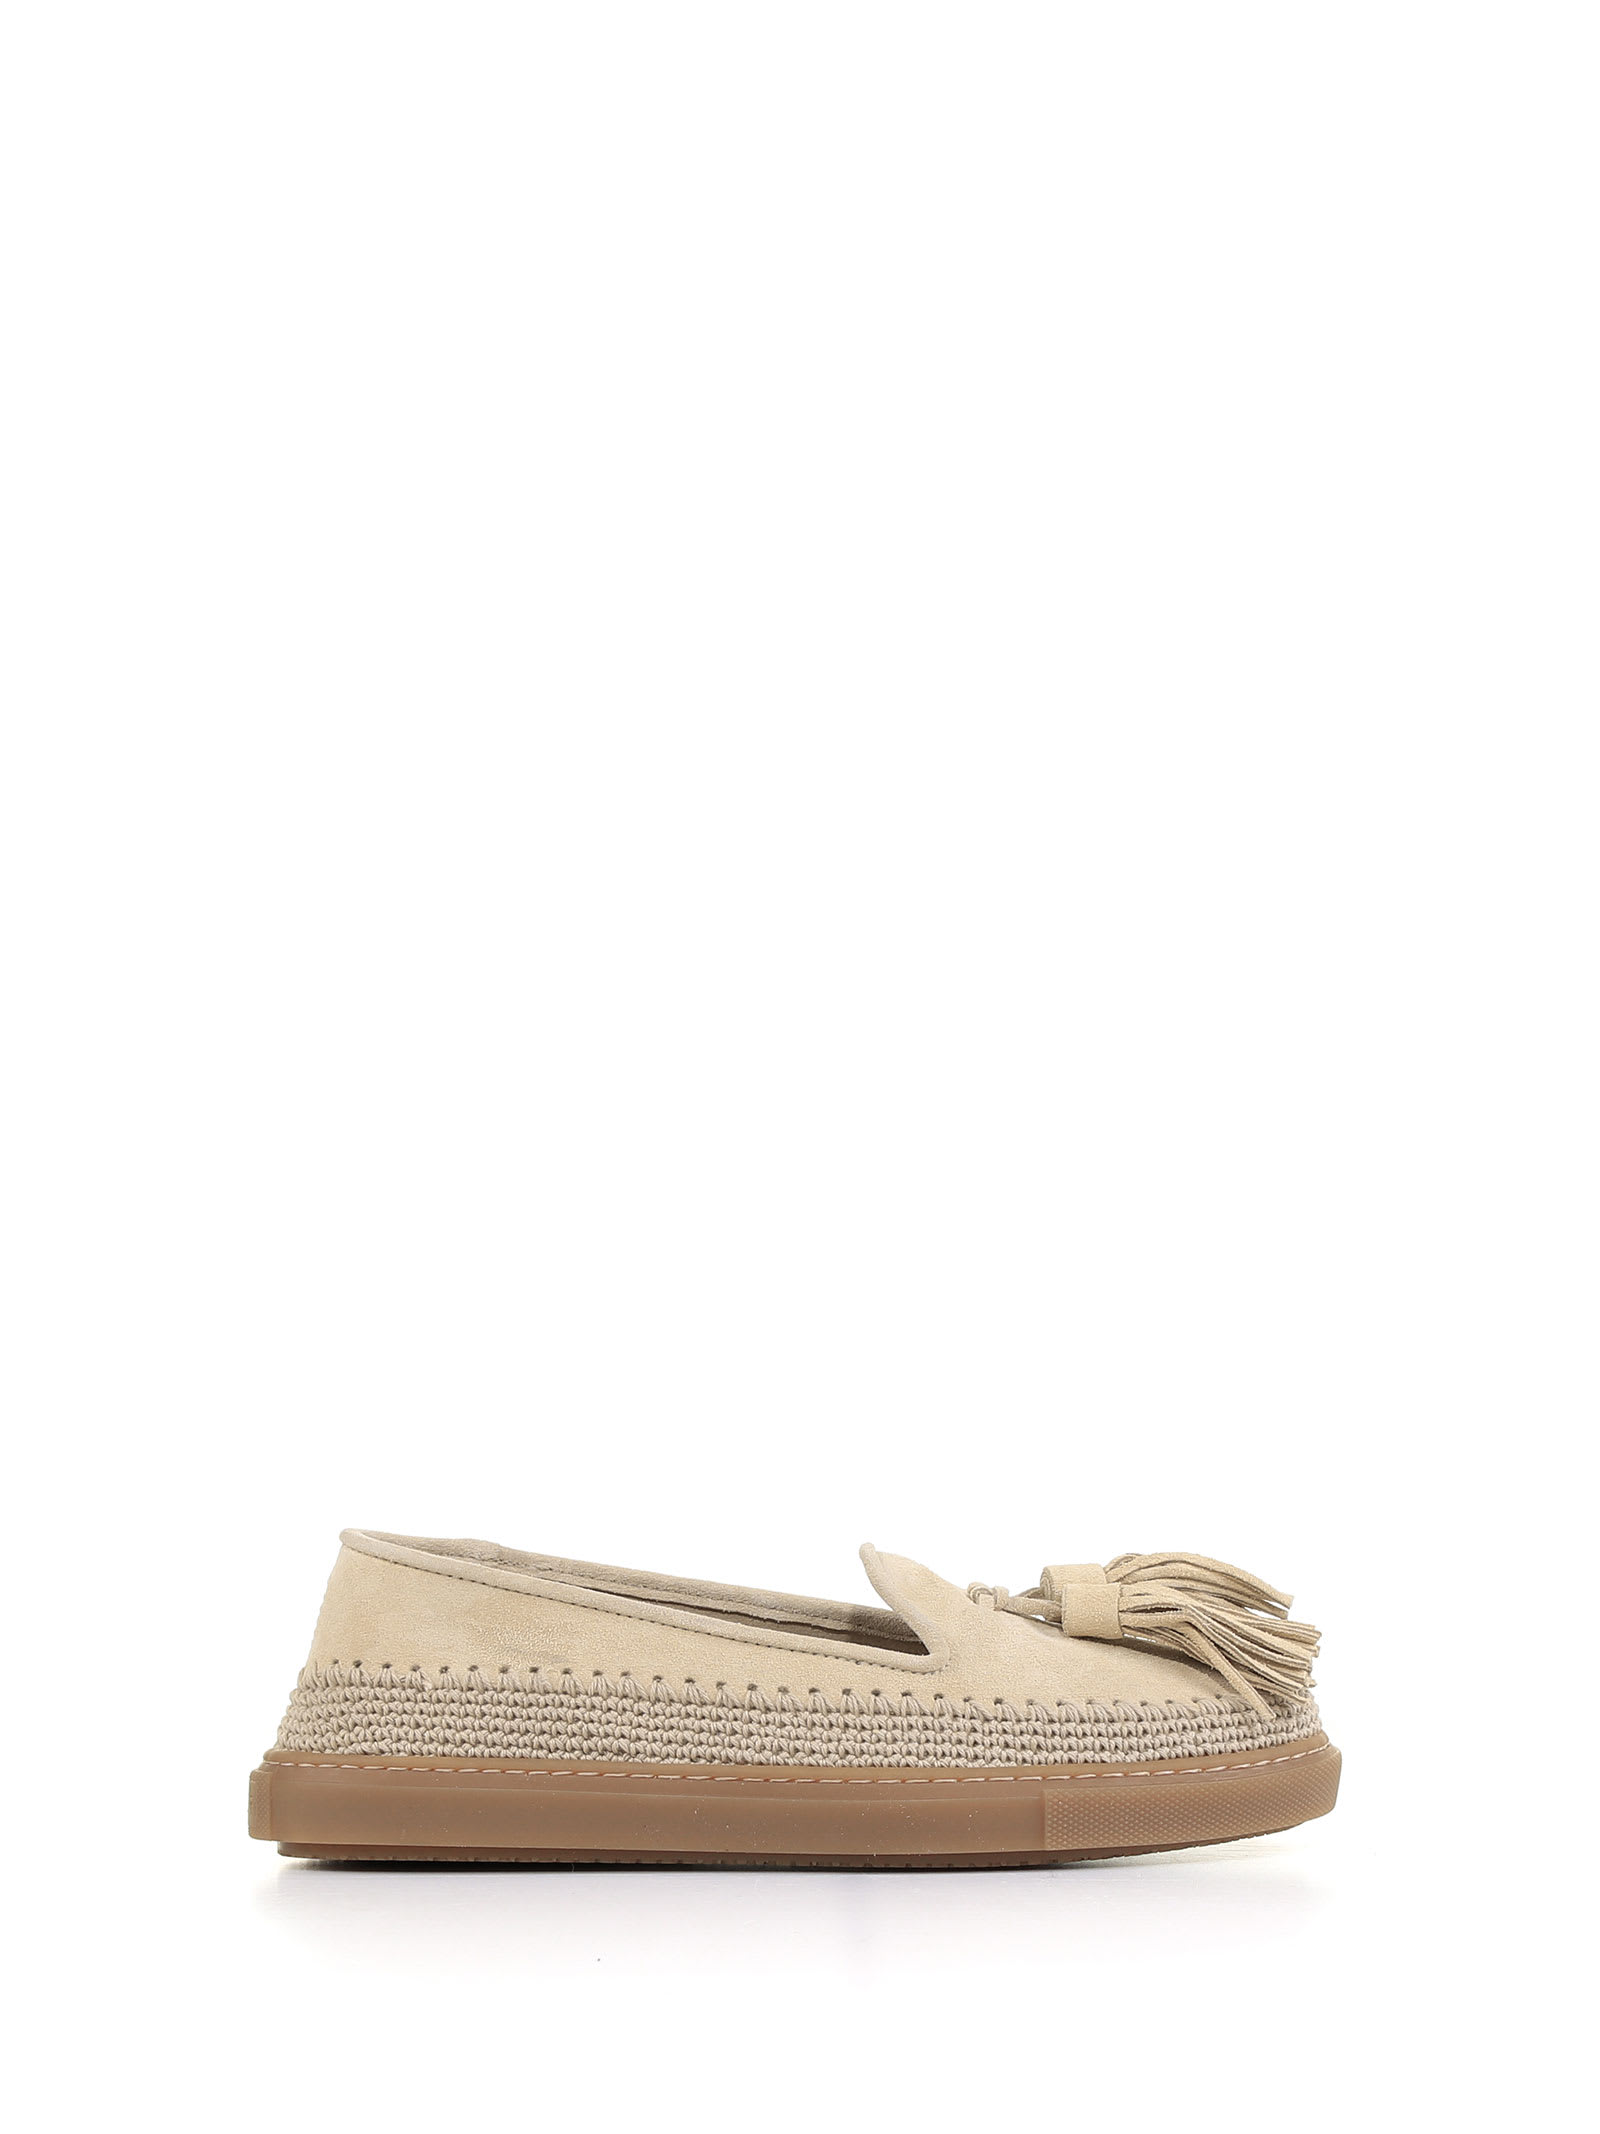 Fratelli Rossetti Suede Loafer With Rope Details